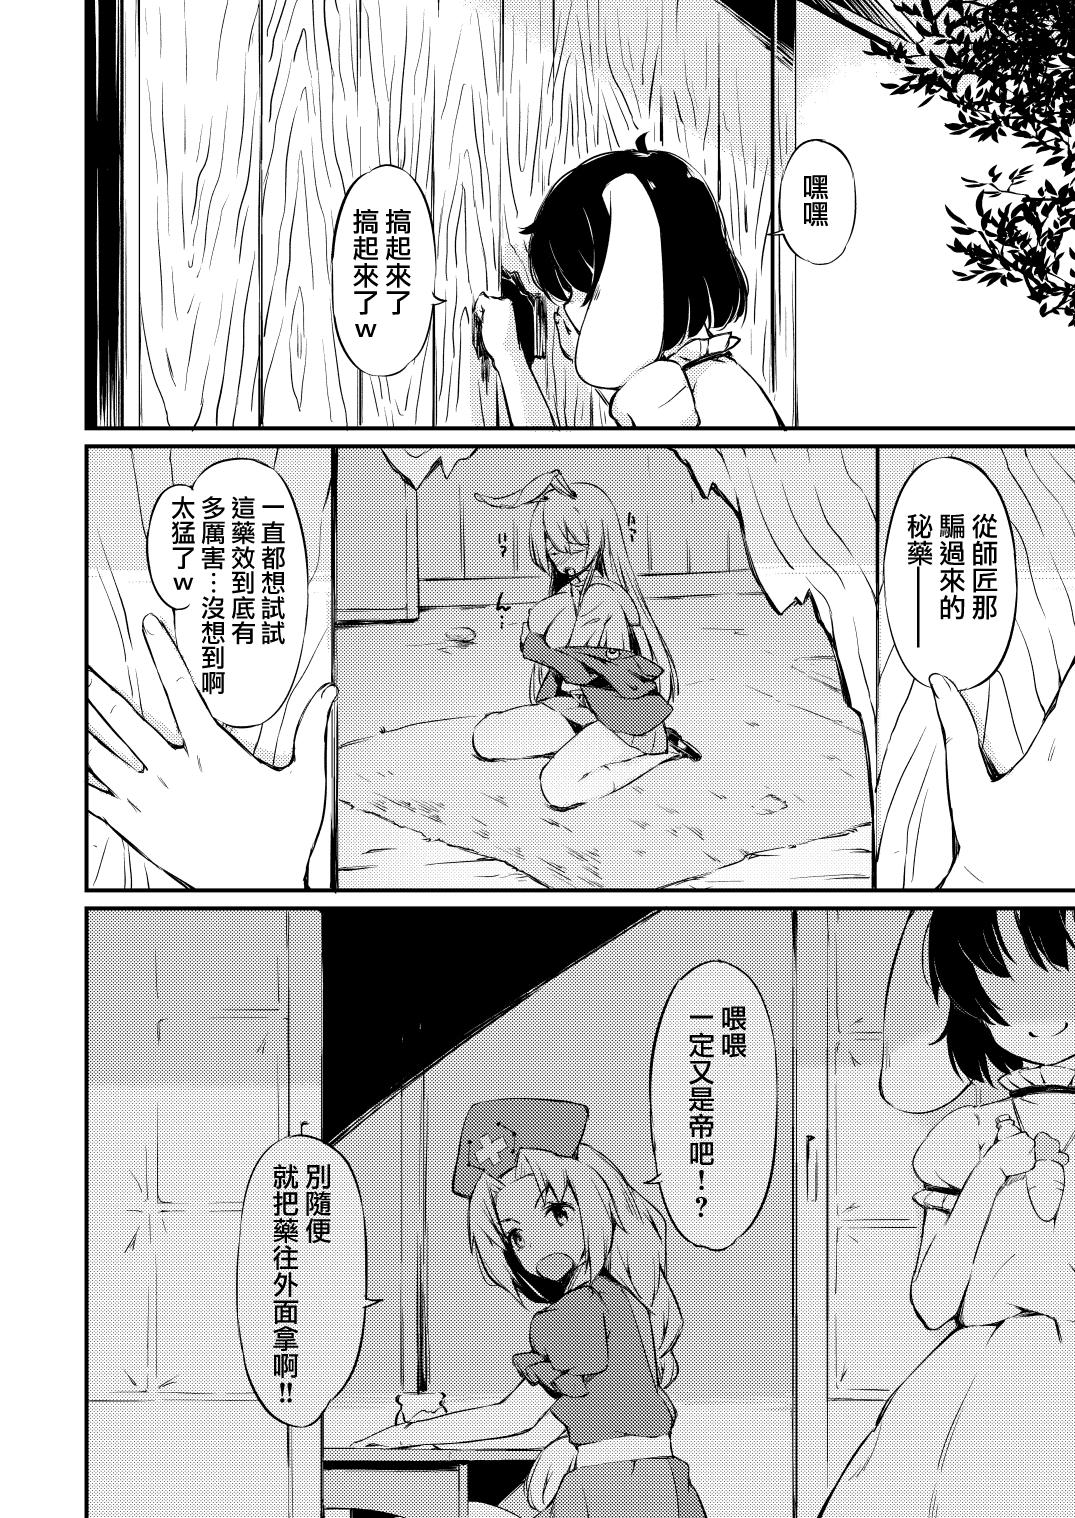 Gostosa Udon-chan Sei Ippai - Touhou project Gay Oralsex - Page 5